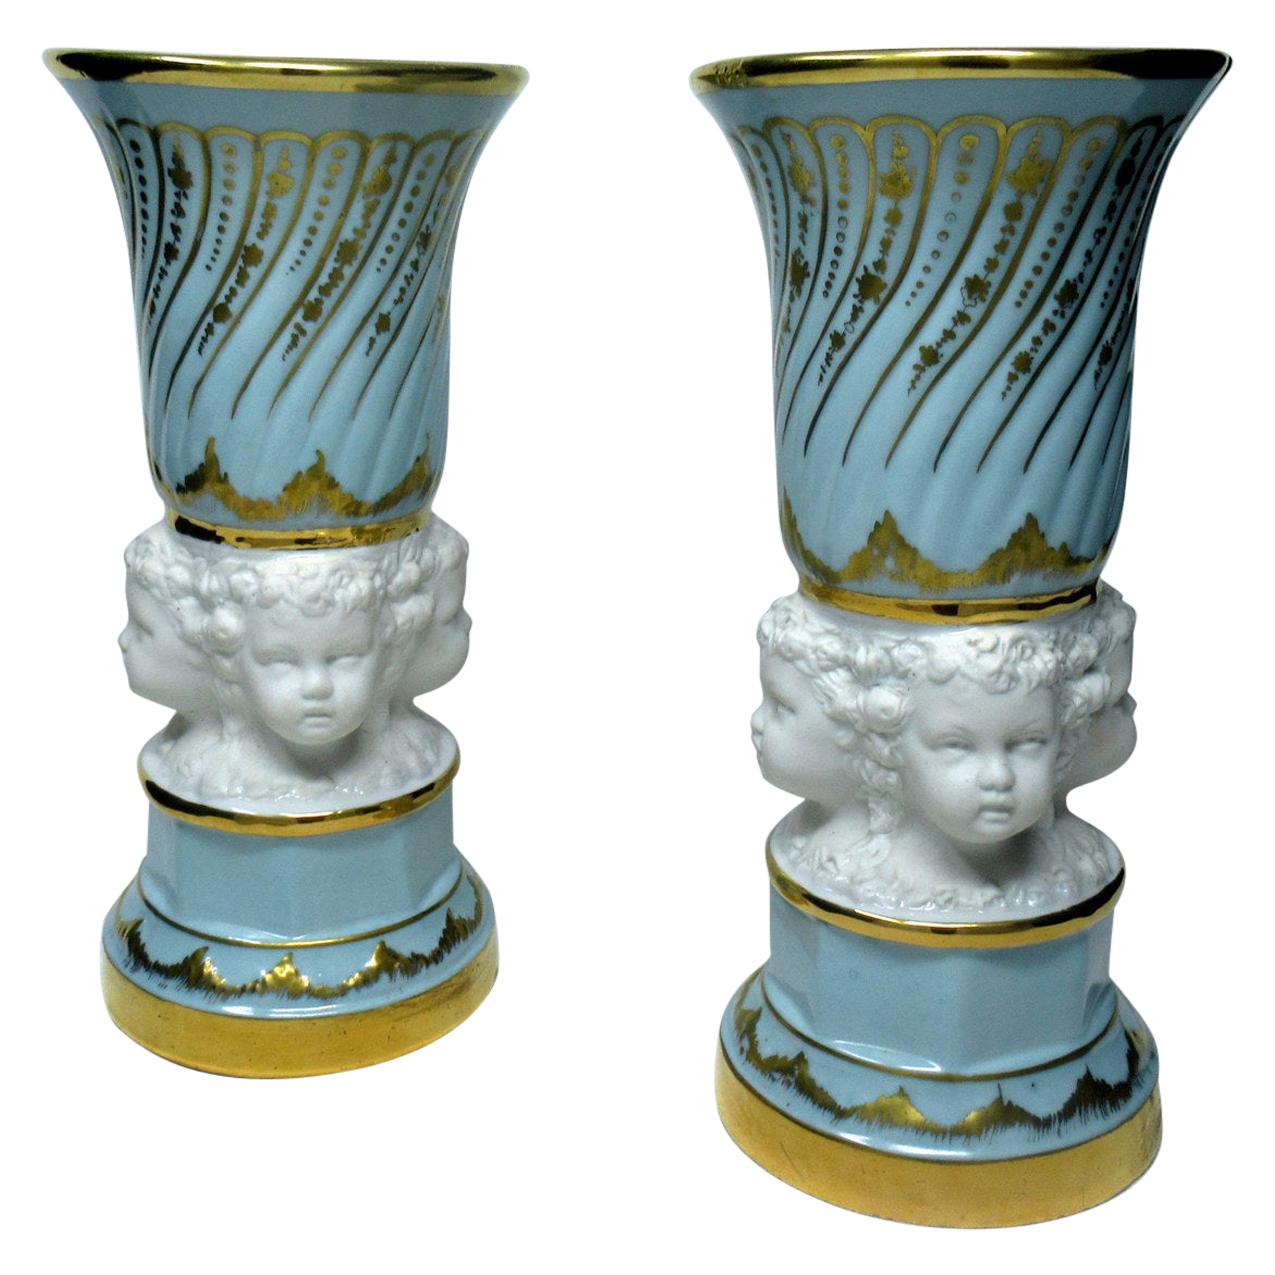 Pair of Midcentury Sèvres Style French Gilt Porcelain Bisque Parian Vases Urns For Sale